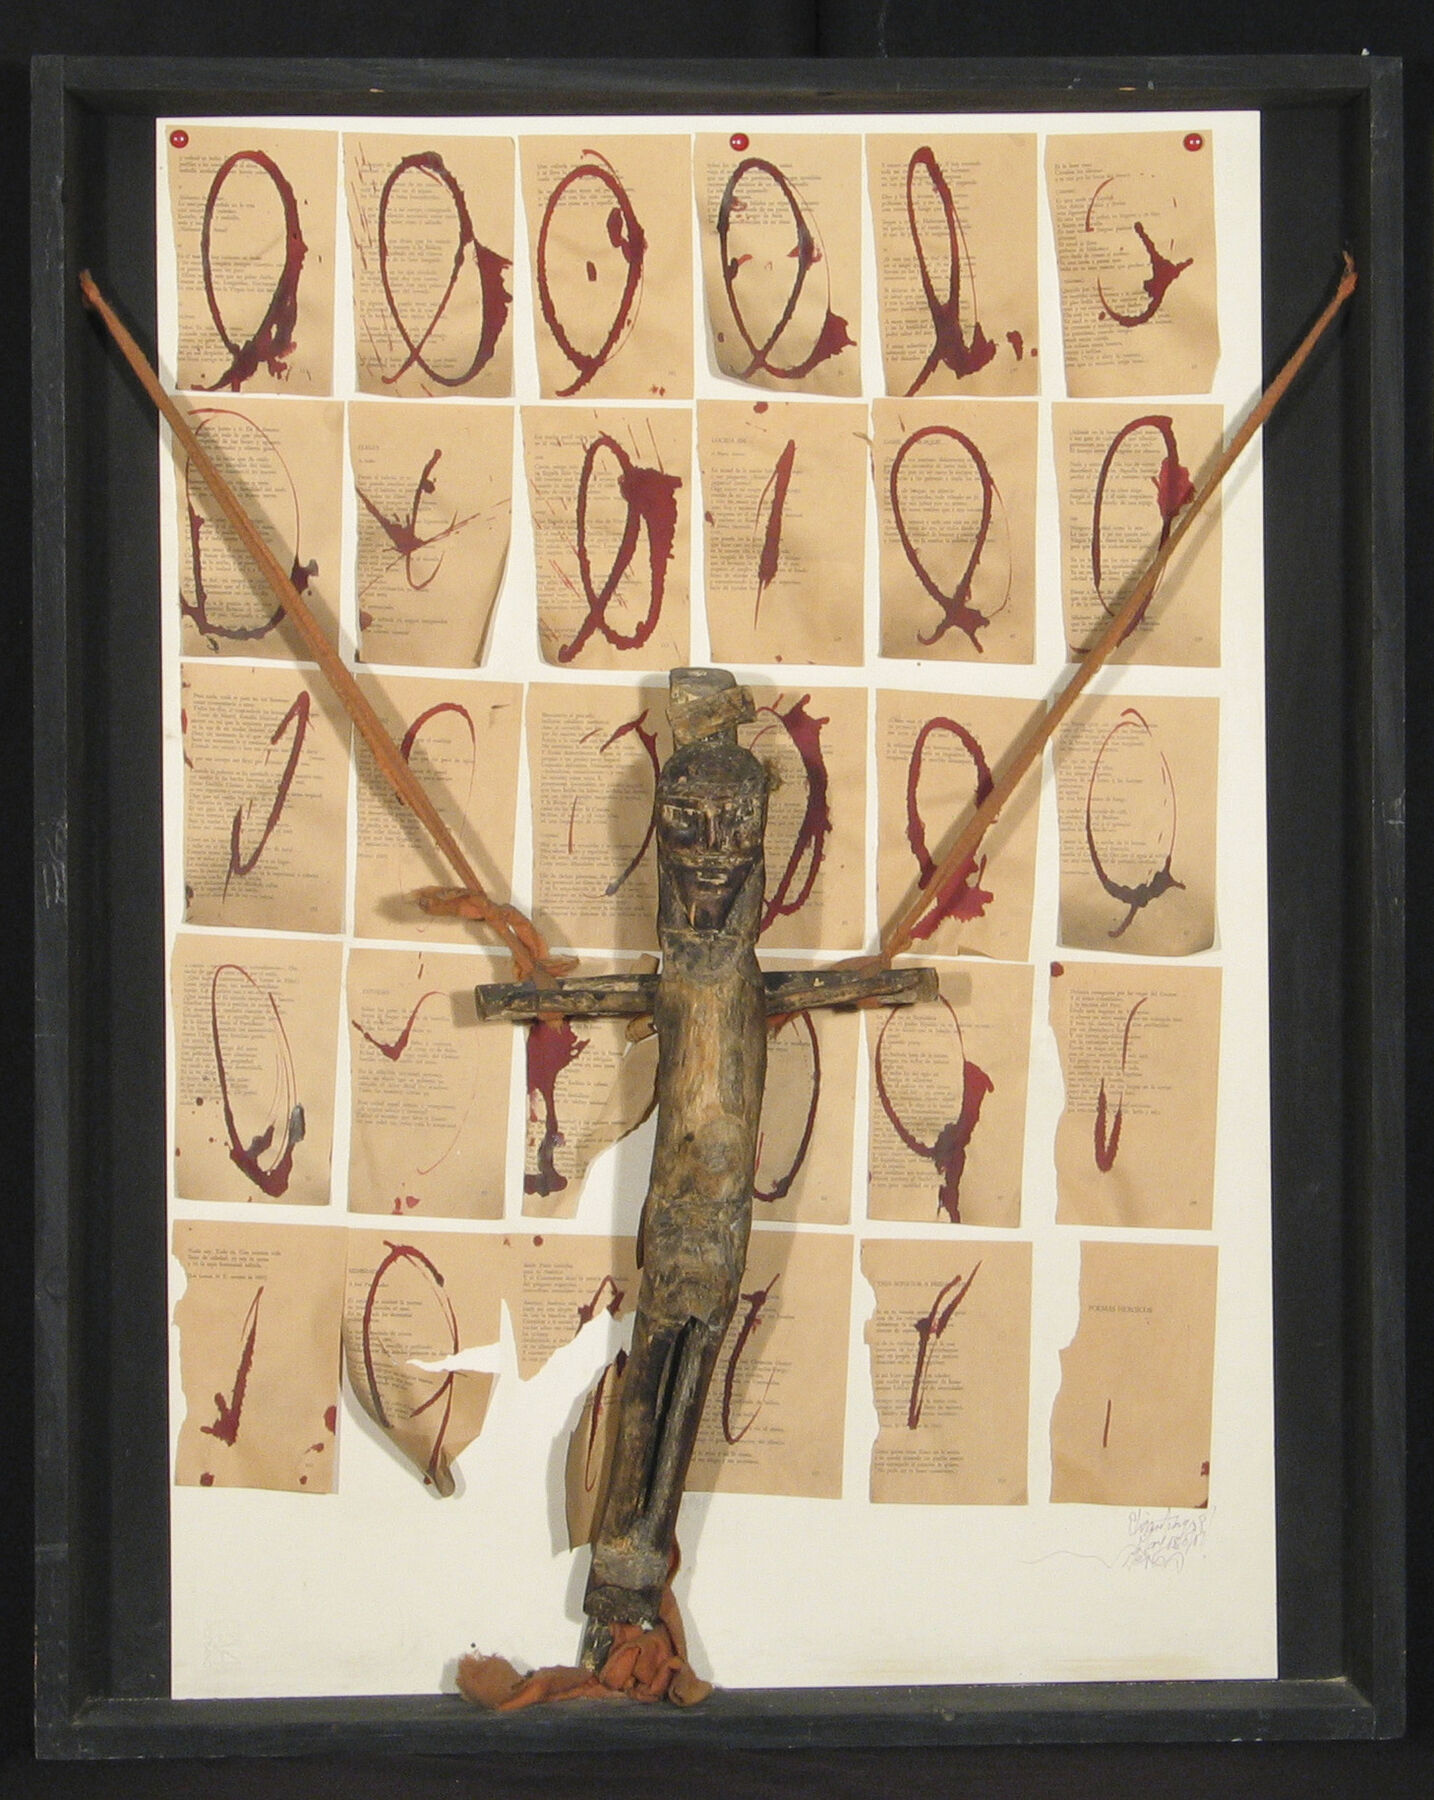 A wooden figure resembling the crucifixion ontop of circular blood stained pages